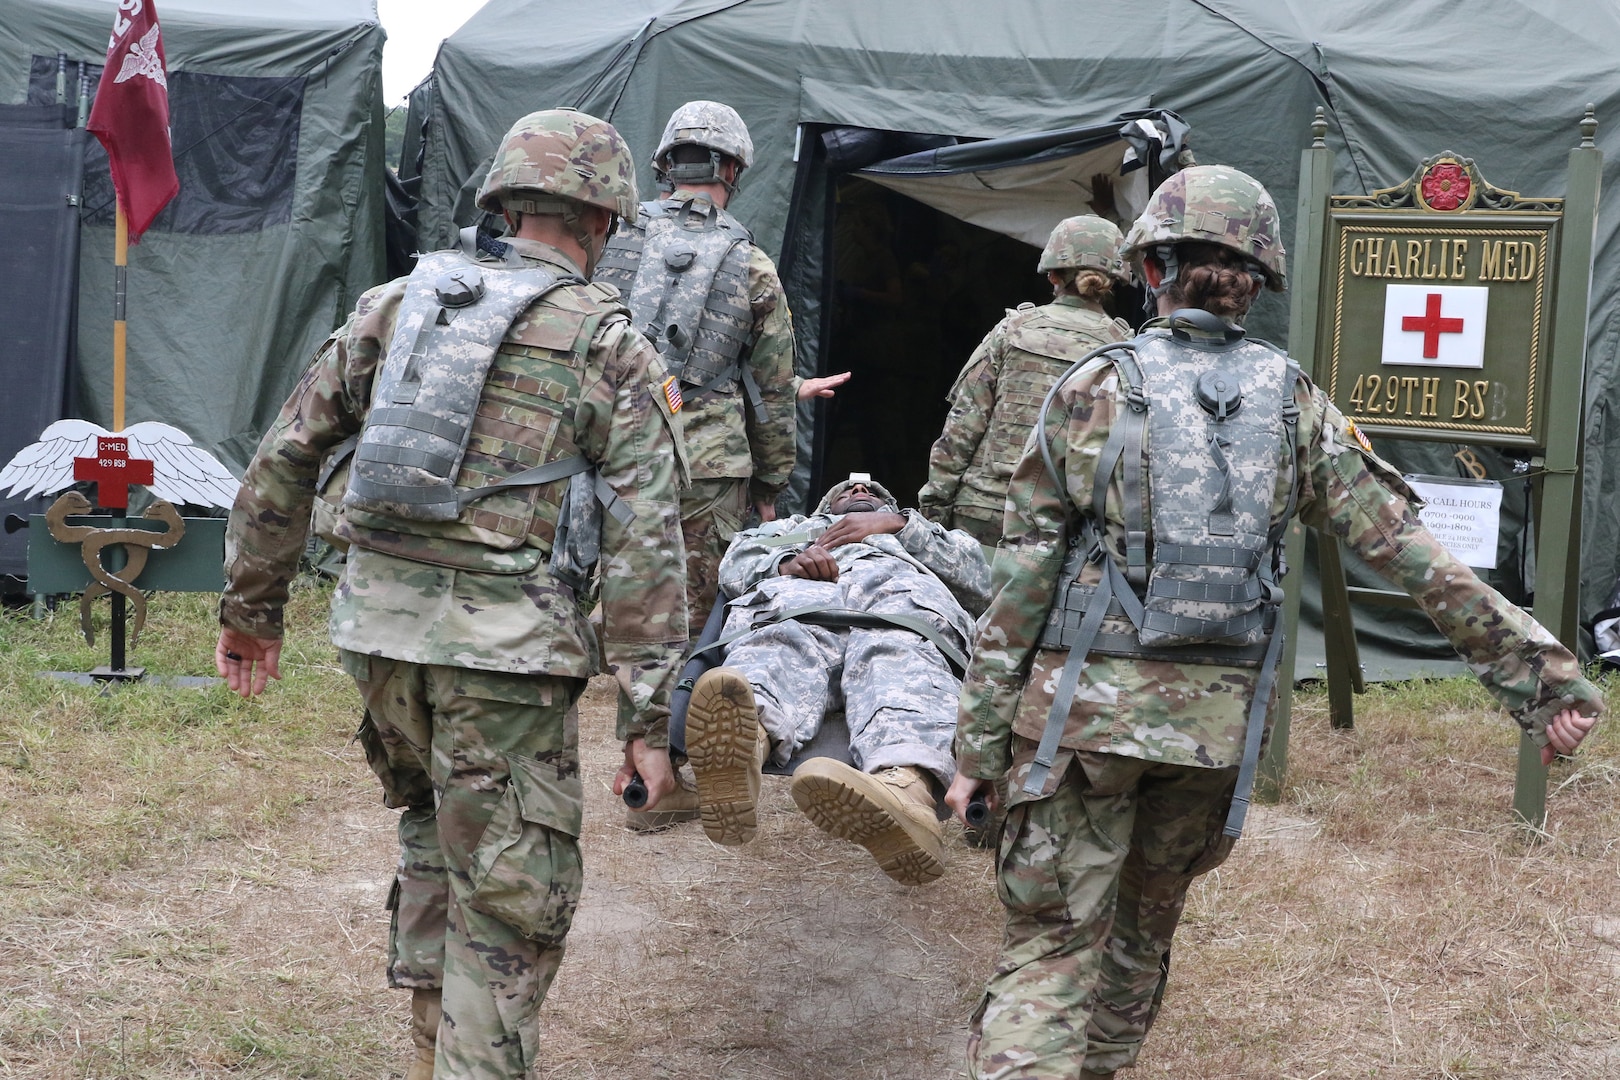 Virginia National Guard Soldiers assigned to the Charlottesville-based Charlie Company, 429th Brigade Support Battalion, 116th Infantry Regiment, 116th Infantry Brigade Combat Team conduct a mass casualty exercise using personnel with simulated injuries July 17, 2019, during eXportable Combat Training Capability Rotation 19-4 at Fort Pickett, Virginia.